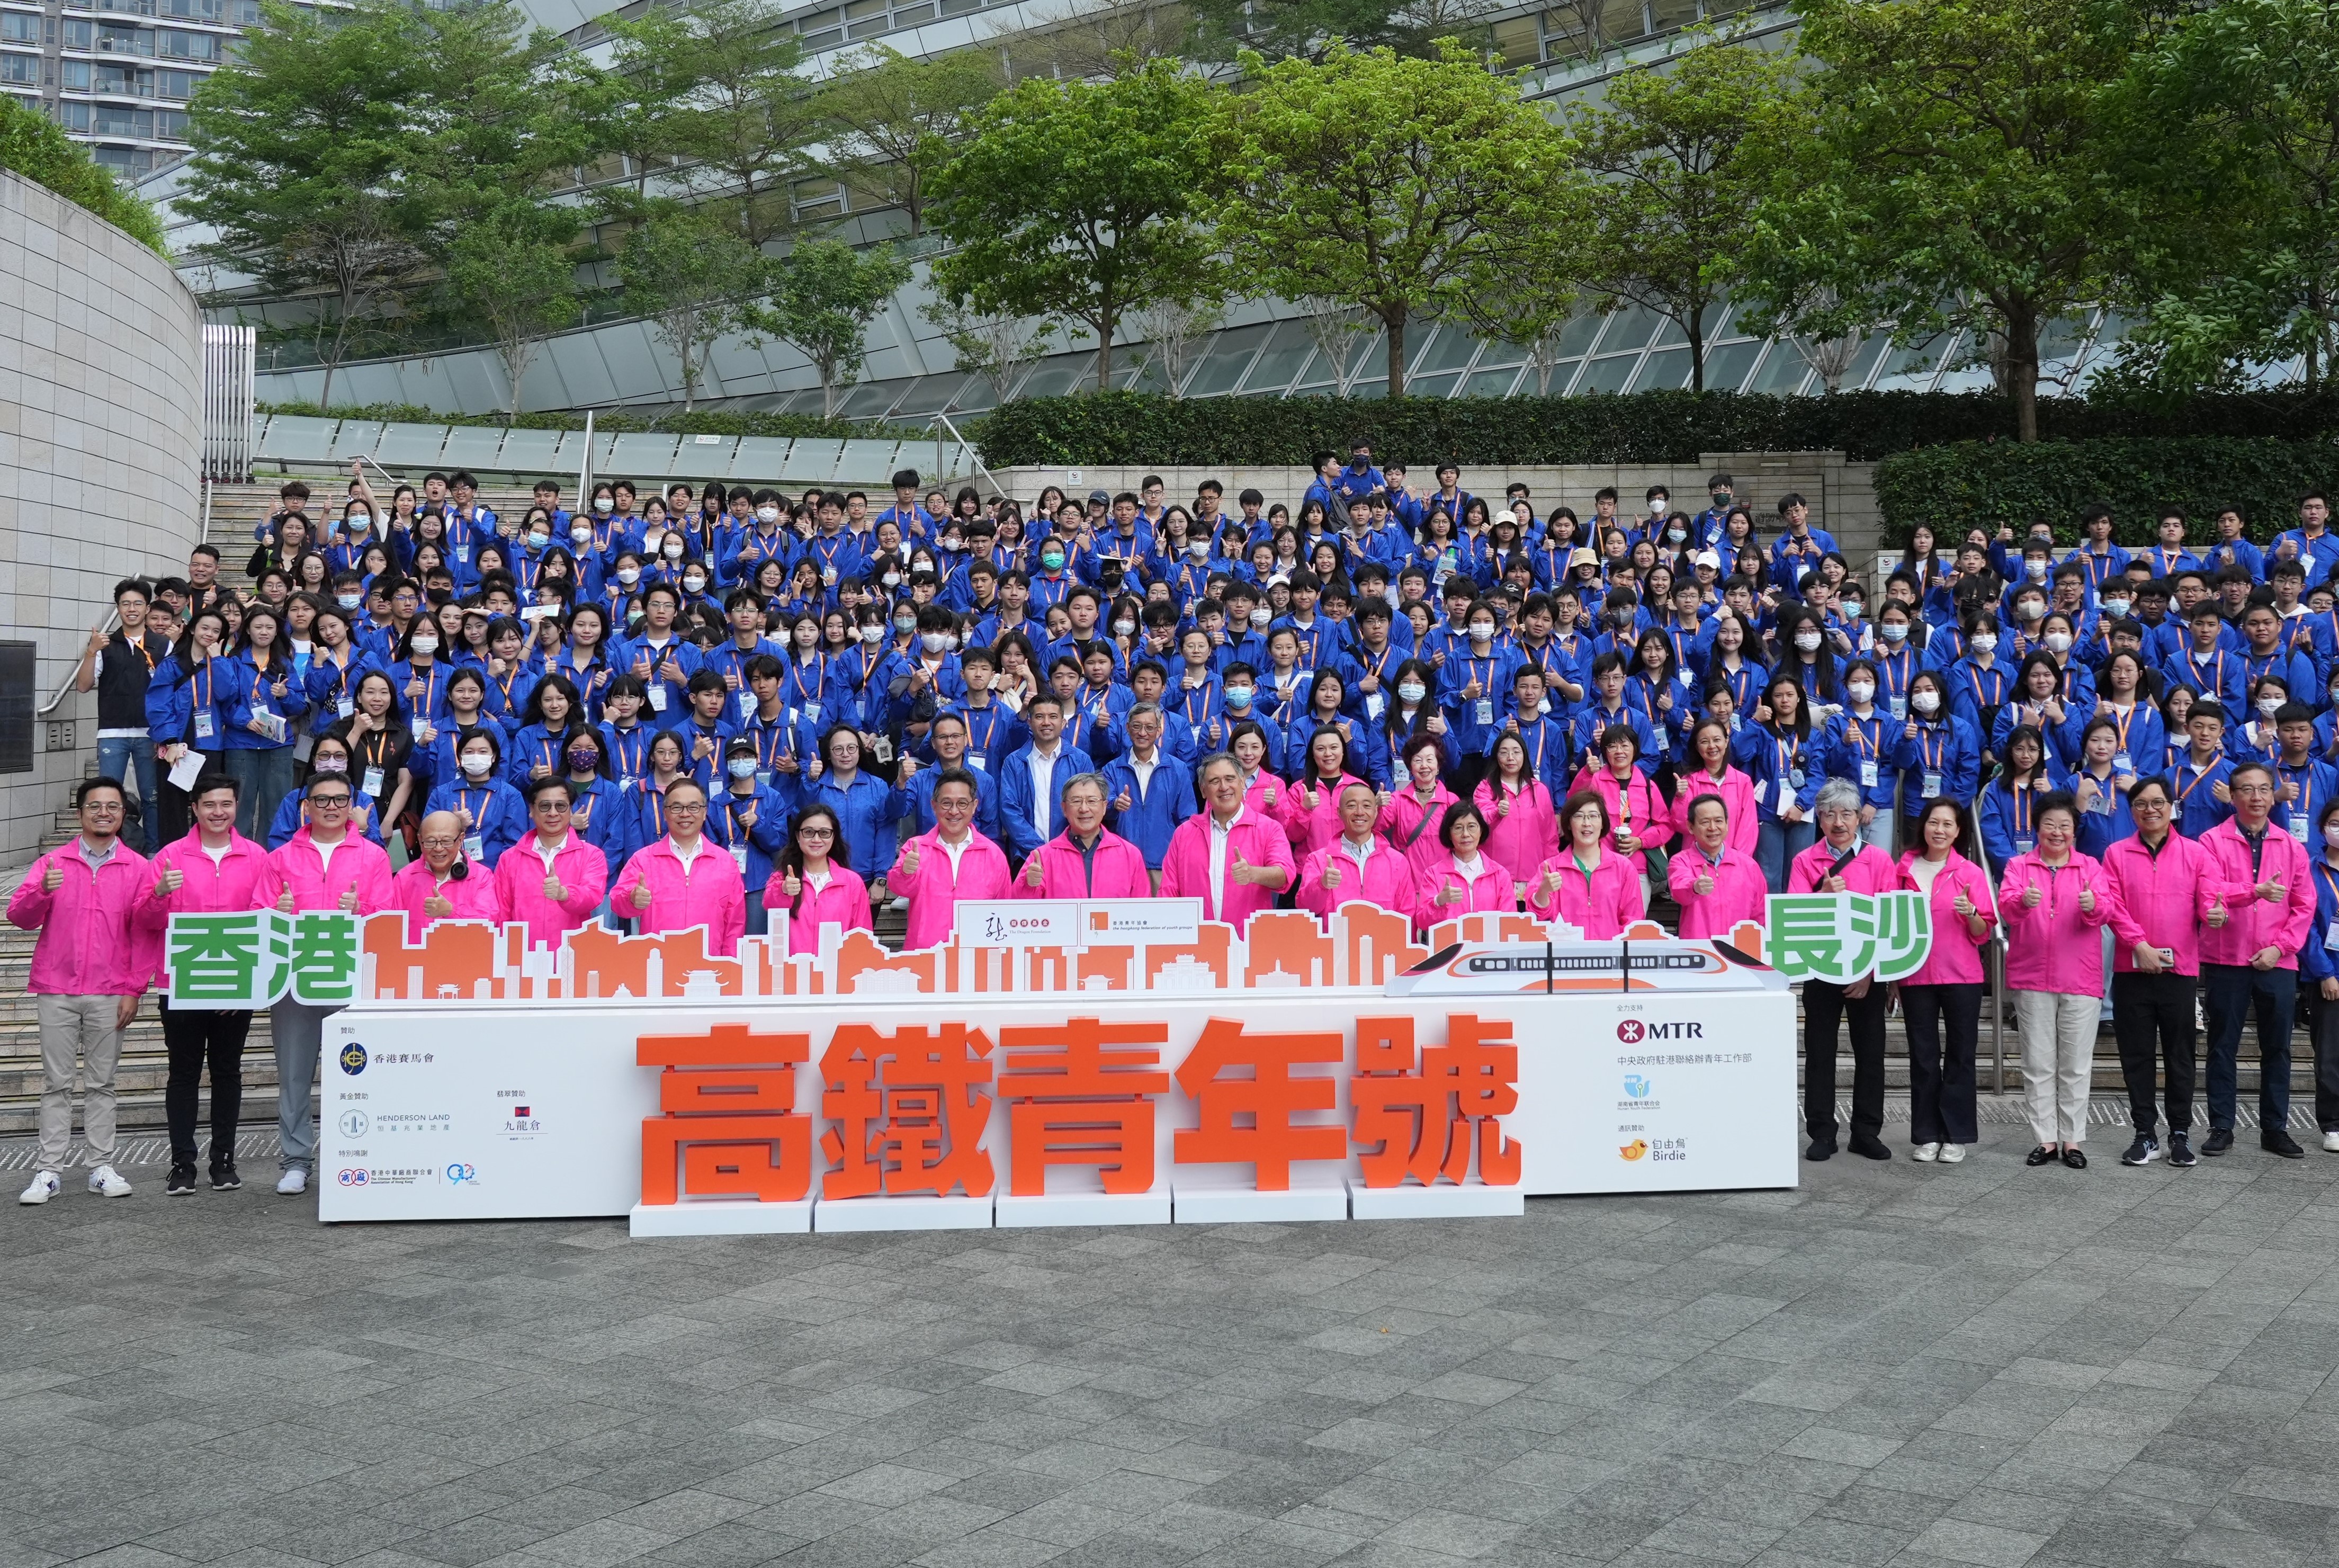 Co-organised by the Dragon Foundation and the Hong Kong Federation of Youth Groups, the 